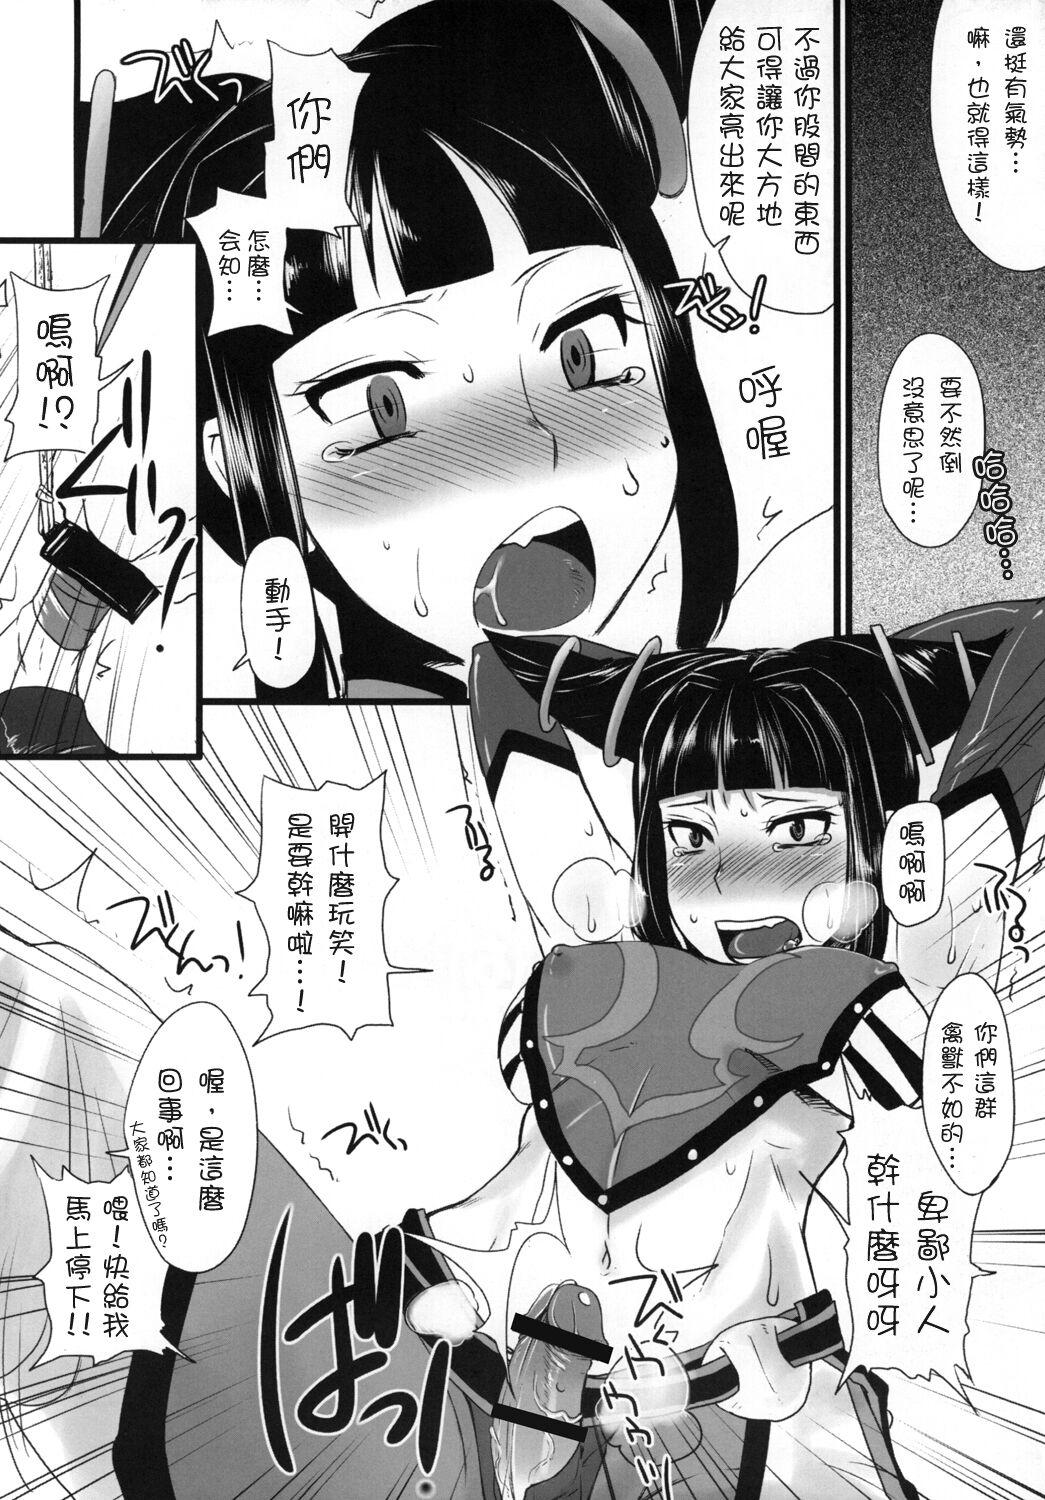 Teenage Bad temper princess. | 暴躁公主 - Street fighter Adorable - Page 4